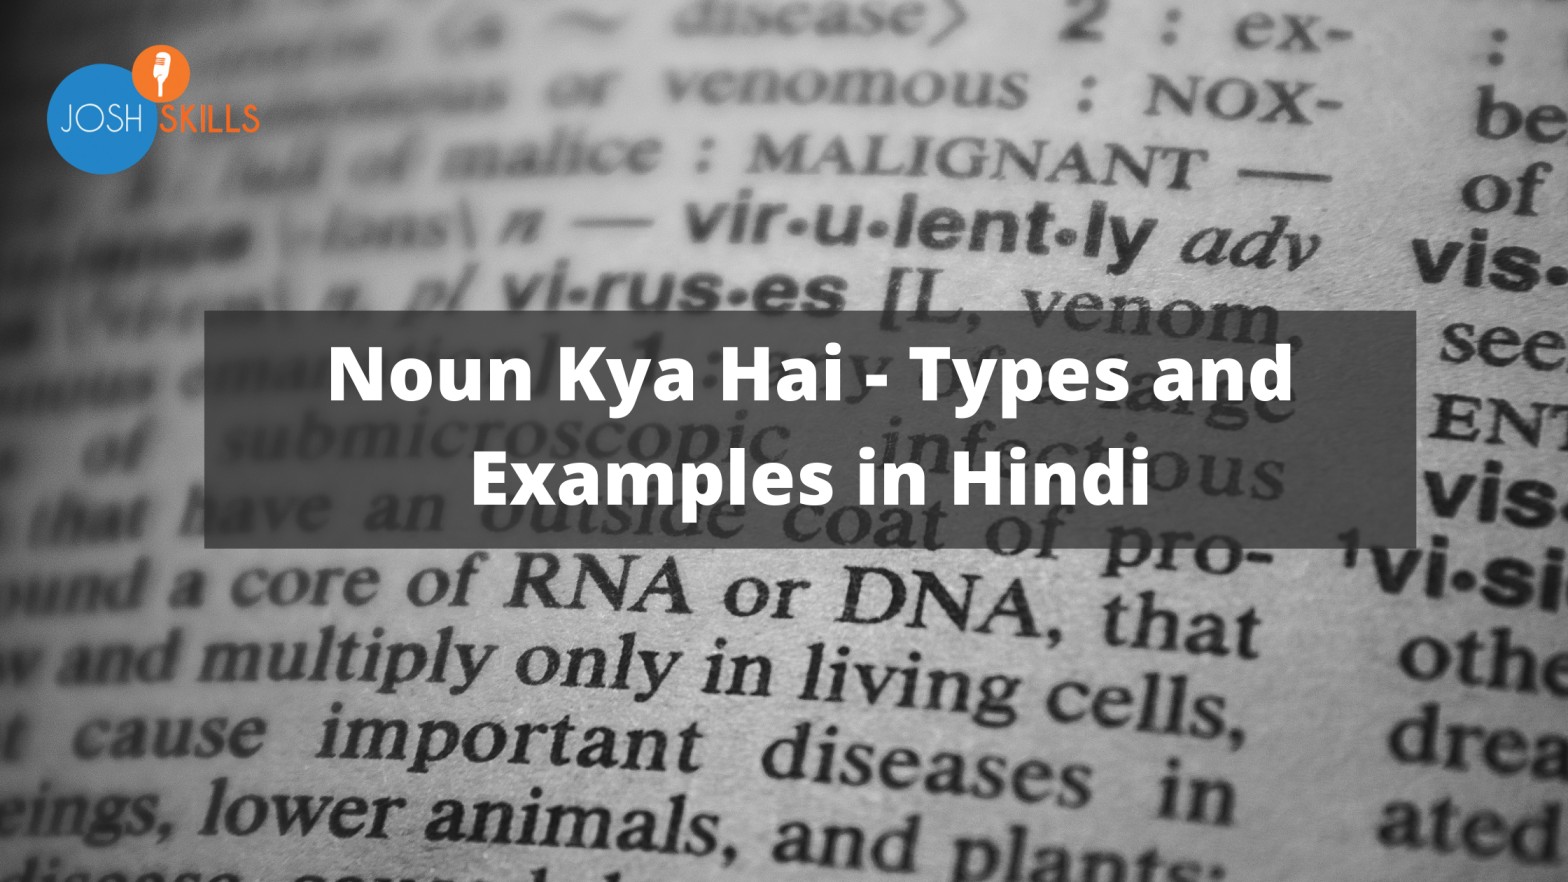 noun-in-hindi-defination-examples-and-types-josh